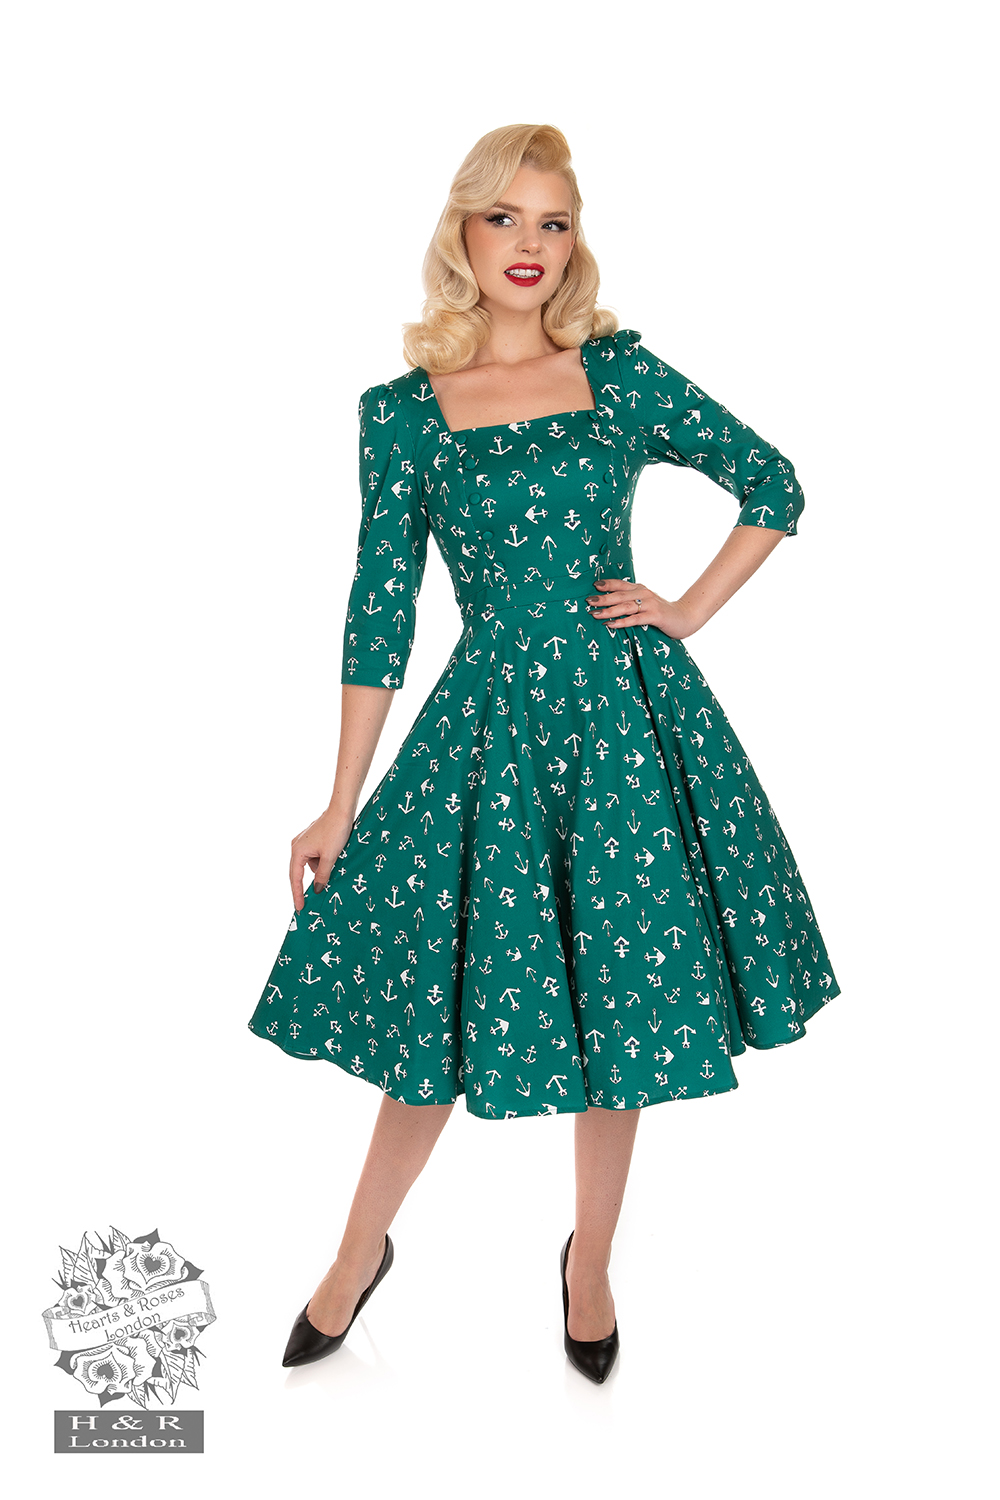 Teal Green Swing Coat, Hearts and Roses London